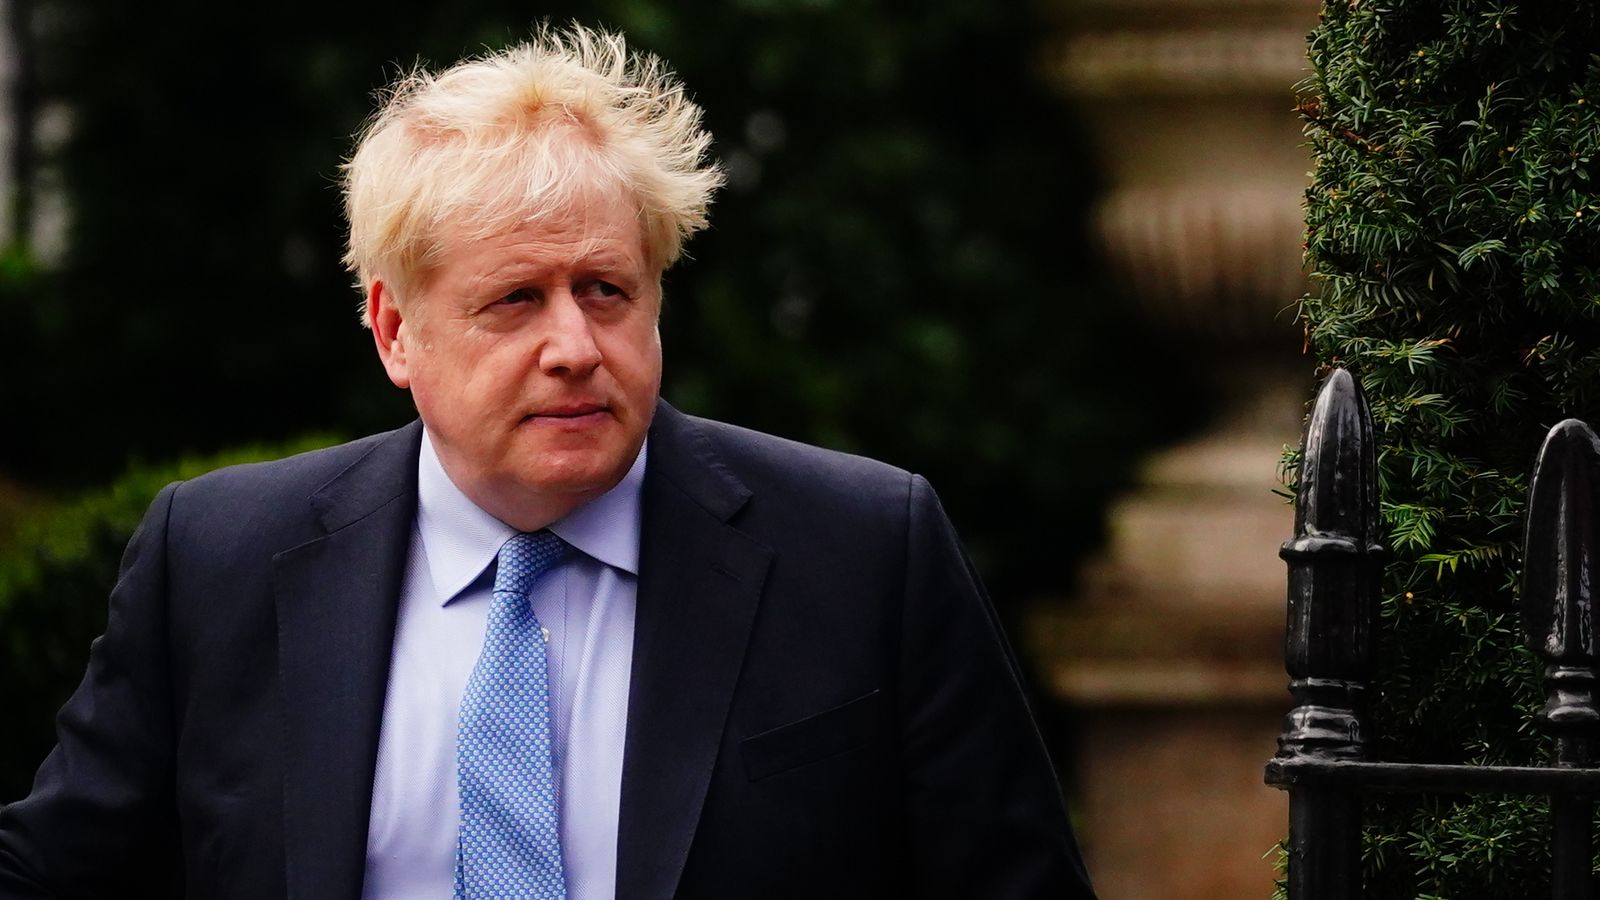 Labour forces final humiliation on Johnson as Sunak looks weak and feeble